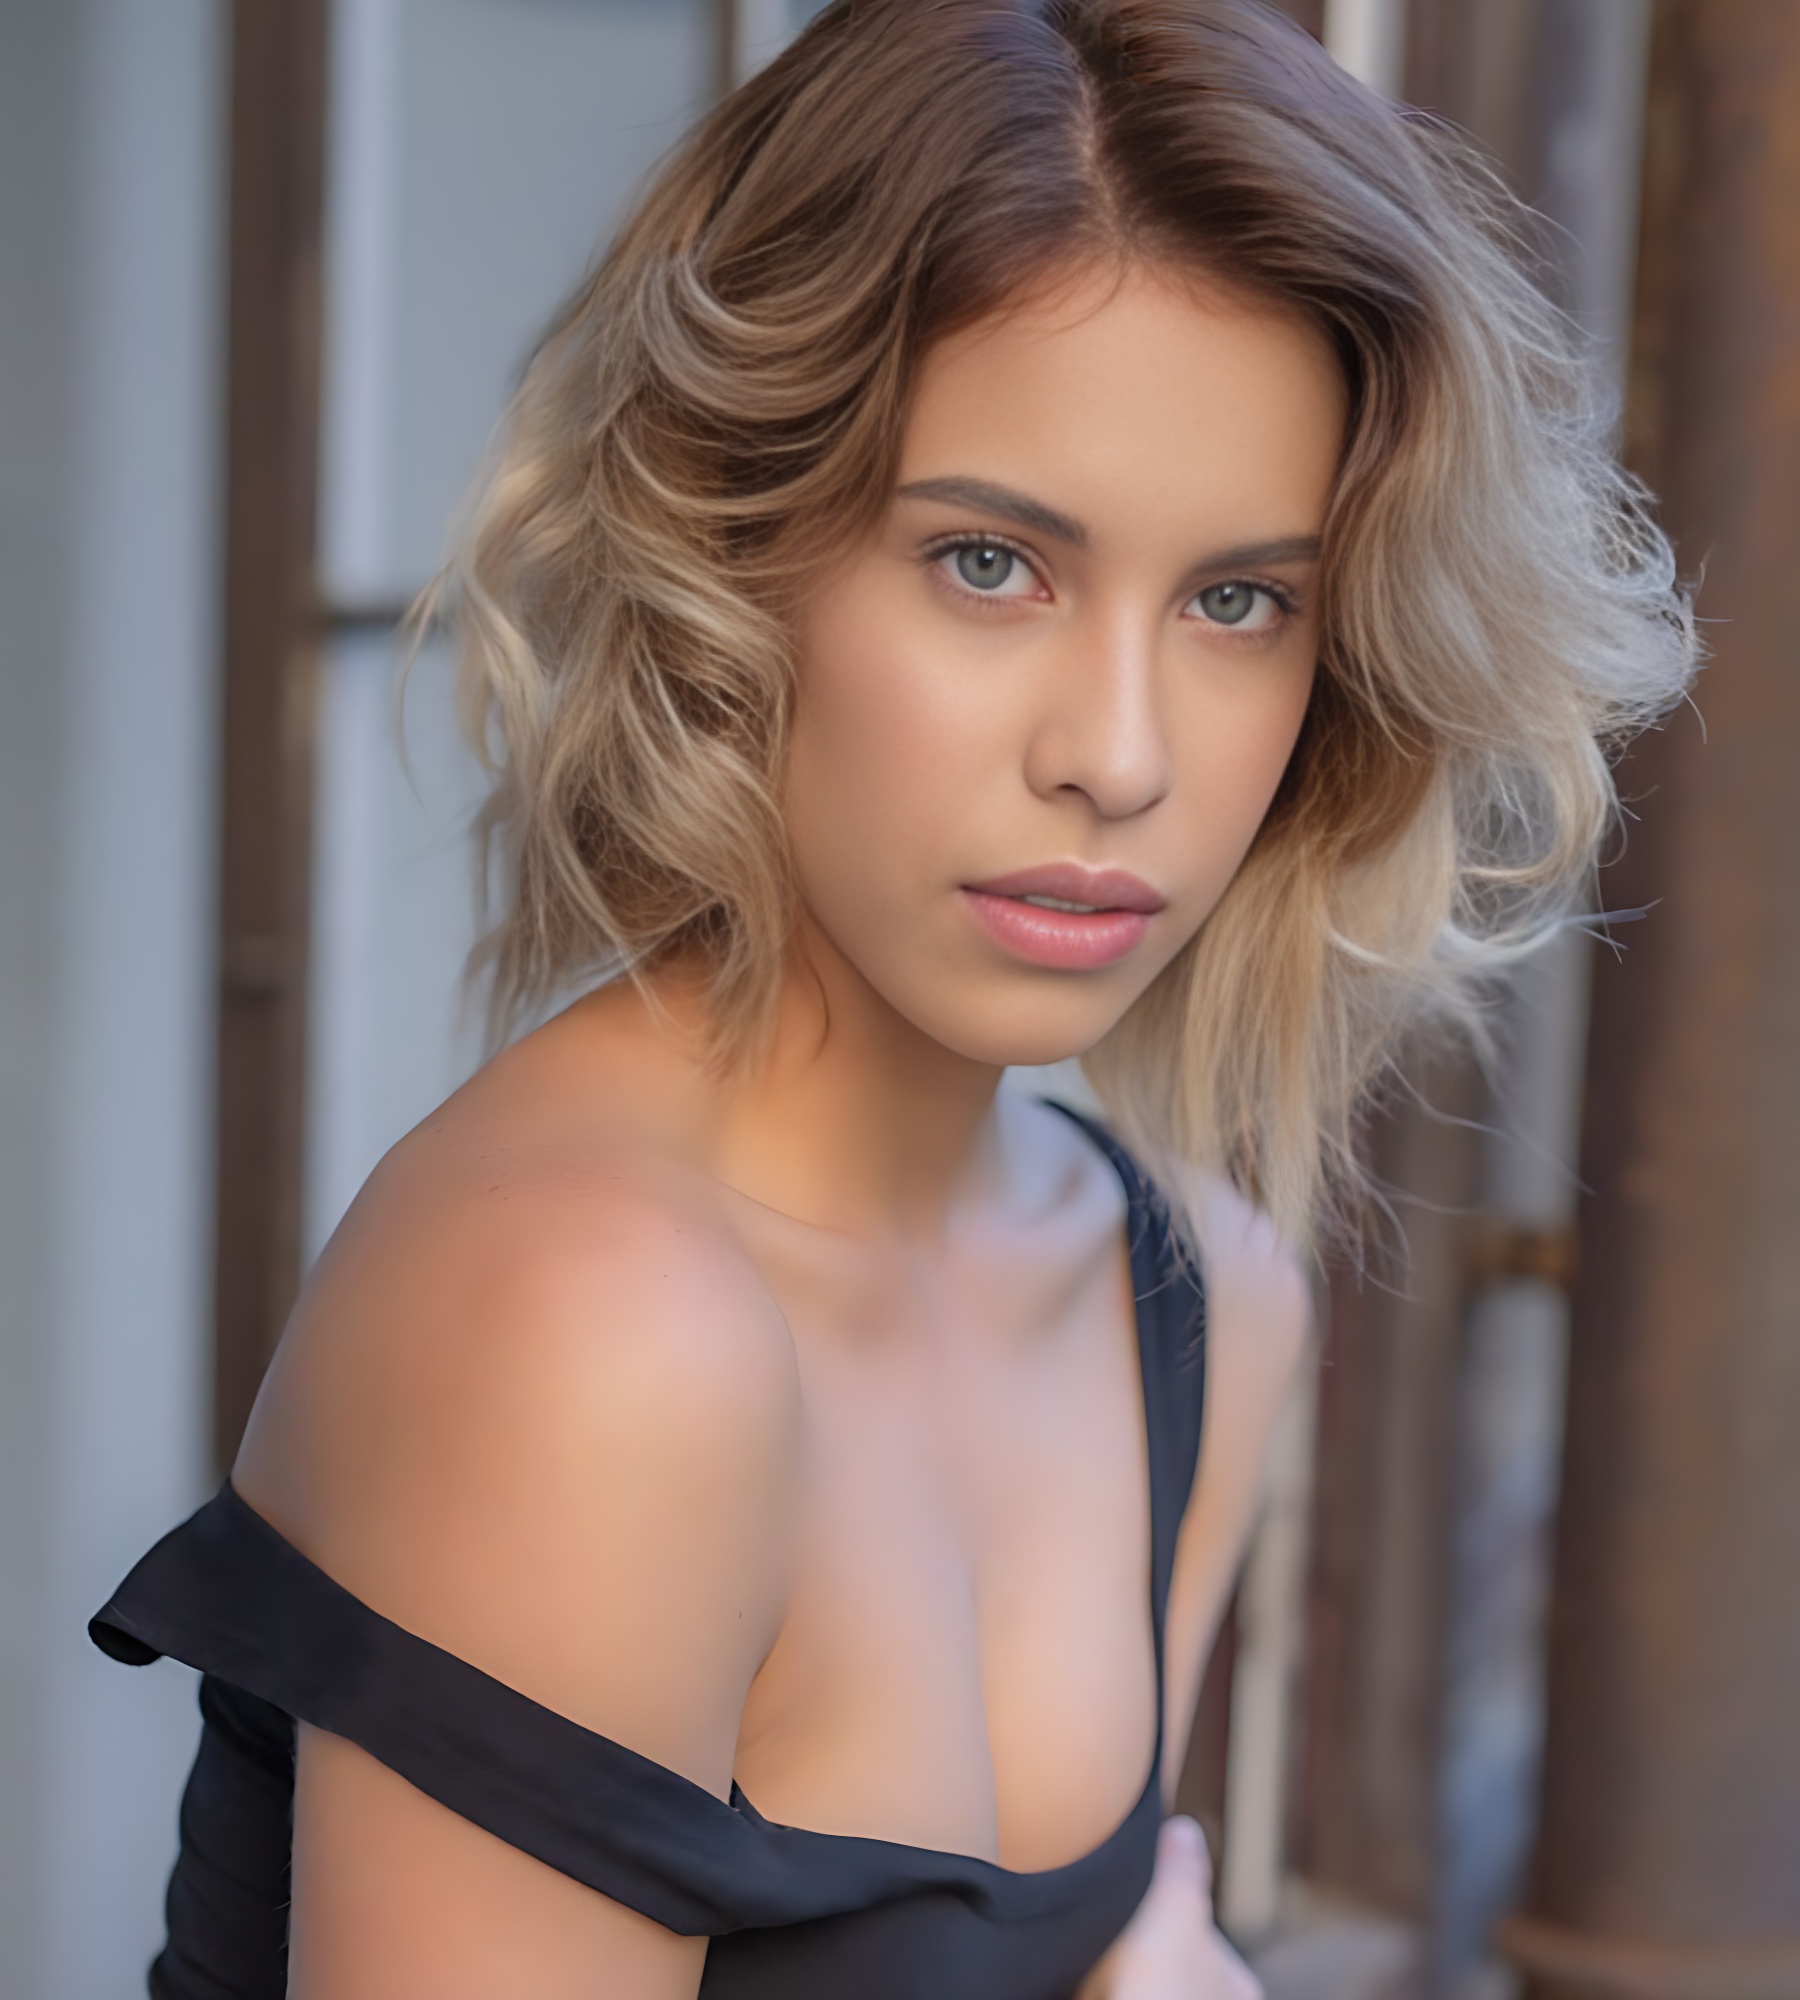 Toni Maria (Actress) Age, Height, Weight, Biography, Wikipedia, Boyfriend, Videos and More